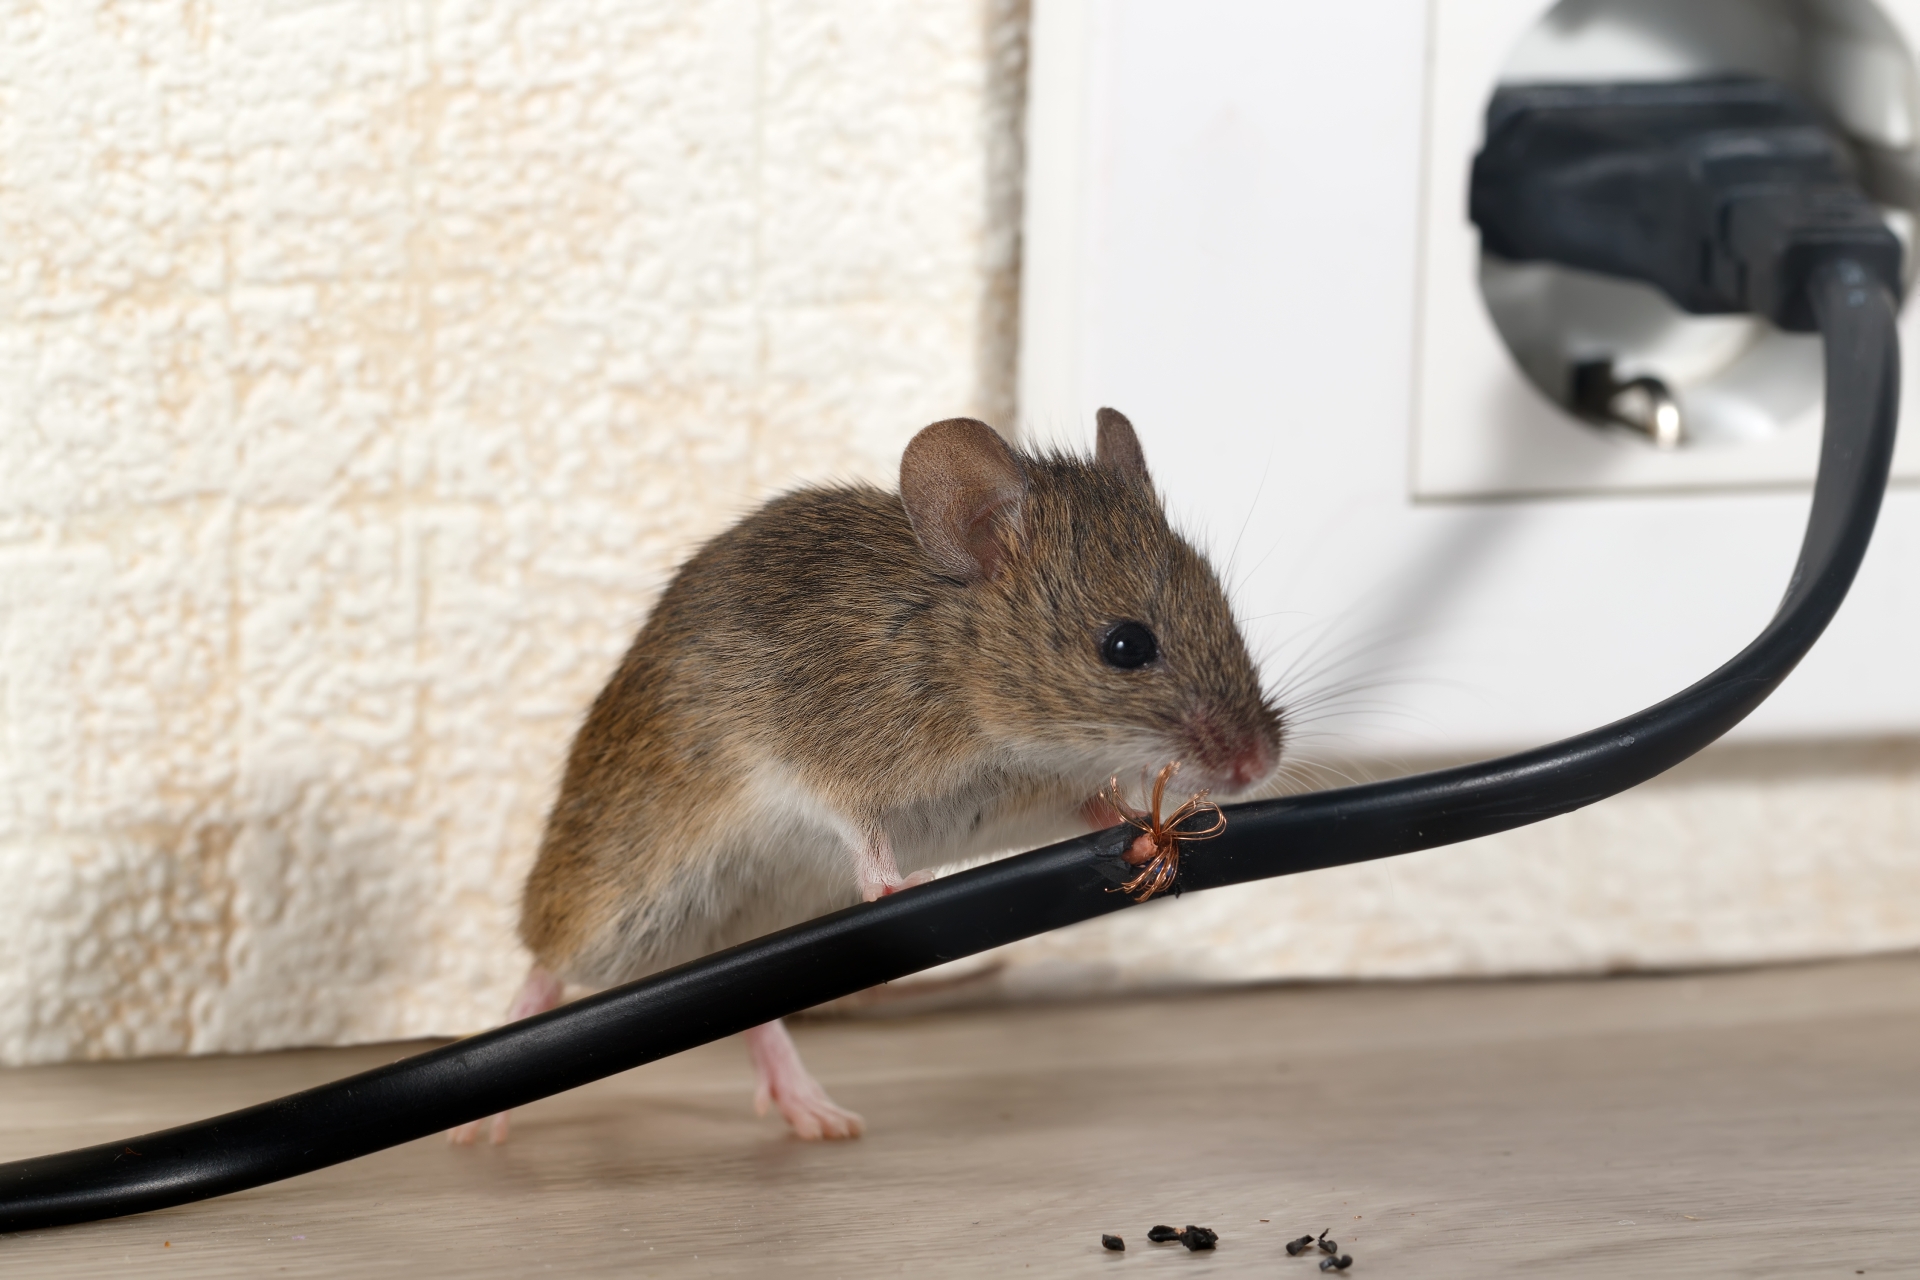 Mice Infestation, Pest Control in Camden Town, NW1. Call Now 020 8166 9746